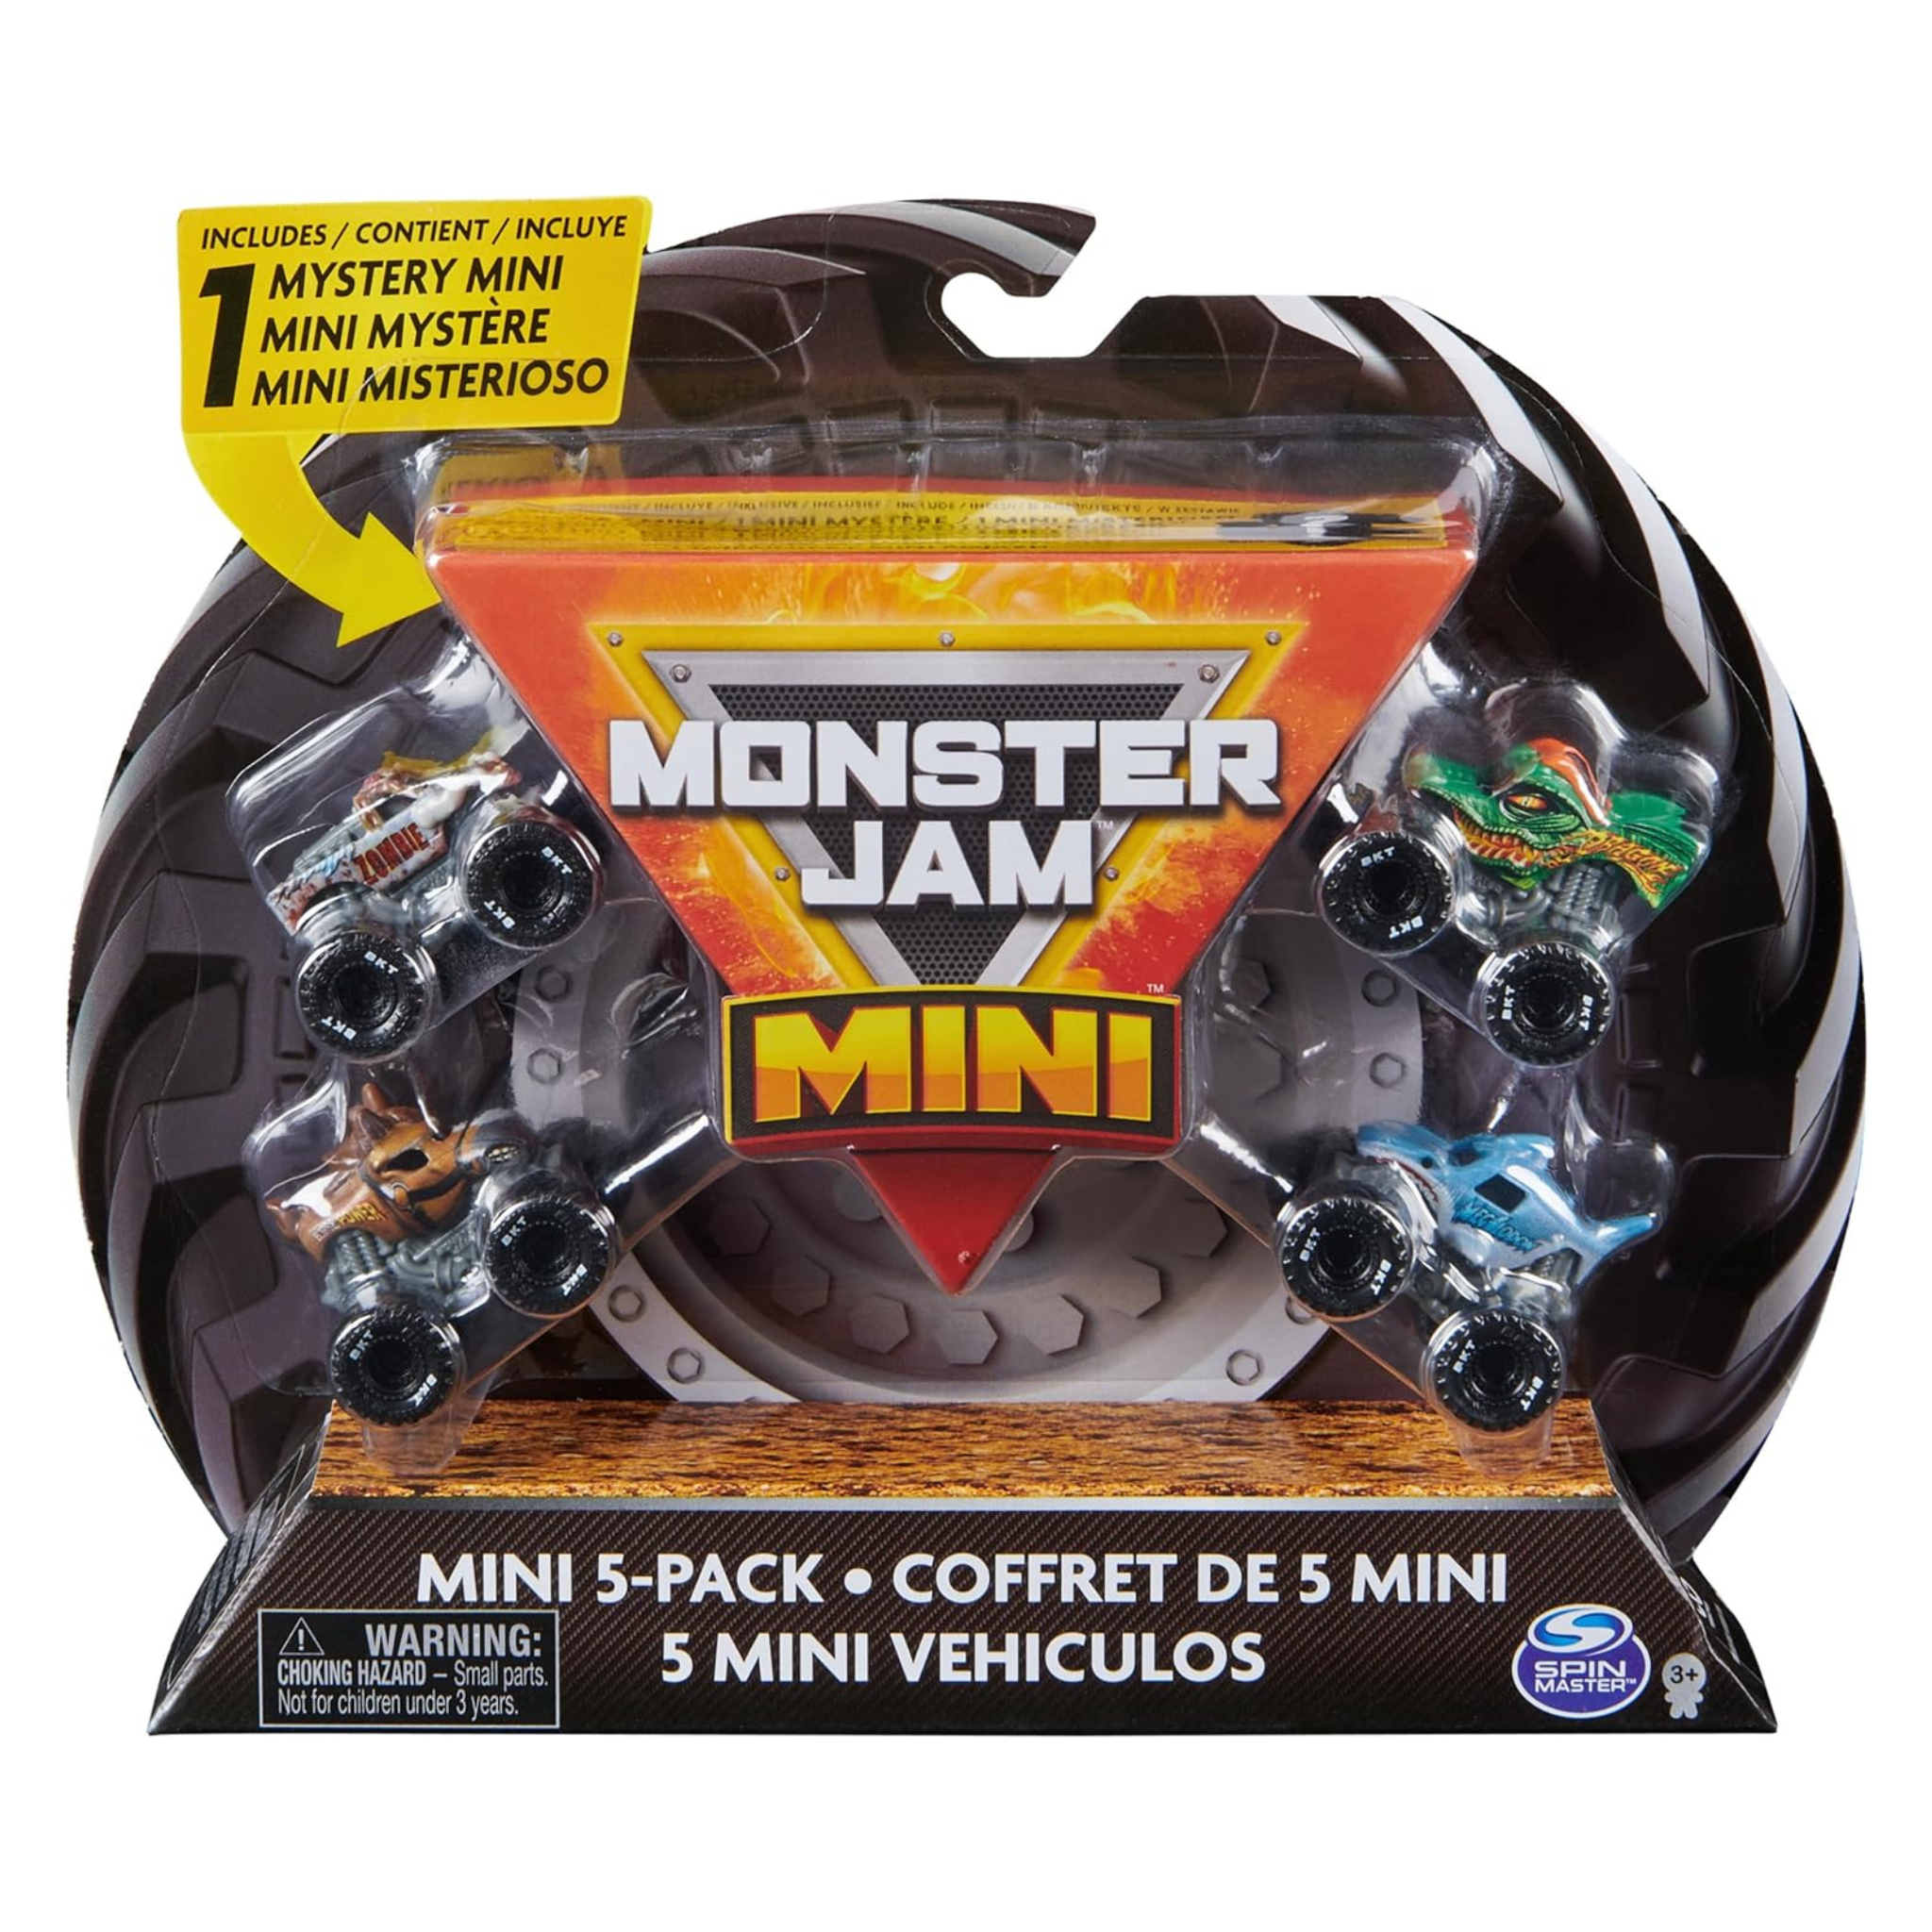 Official Mini 5-Pack Monster Jam with Mystery Collectible Monster Truck